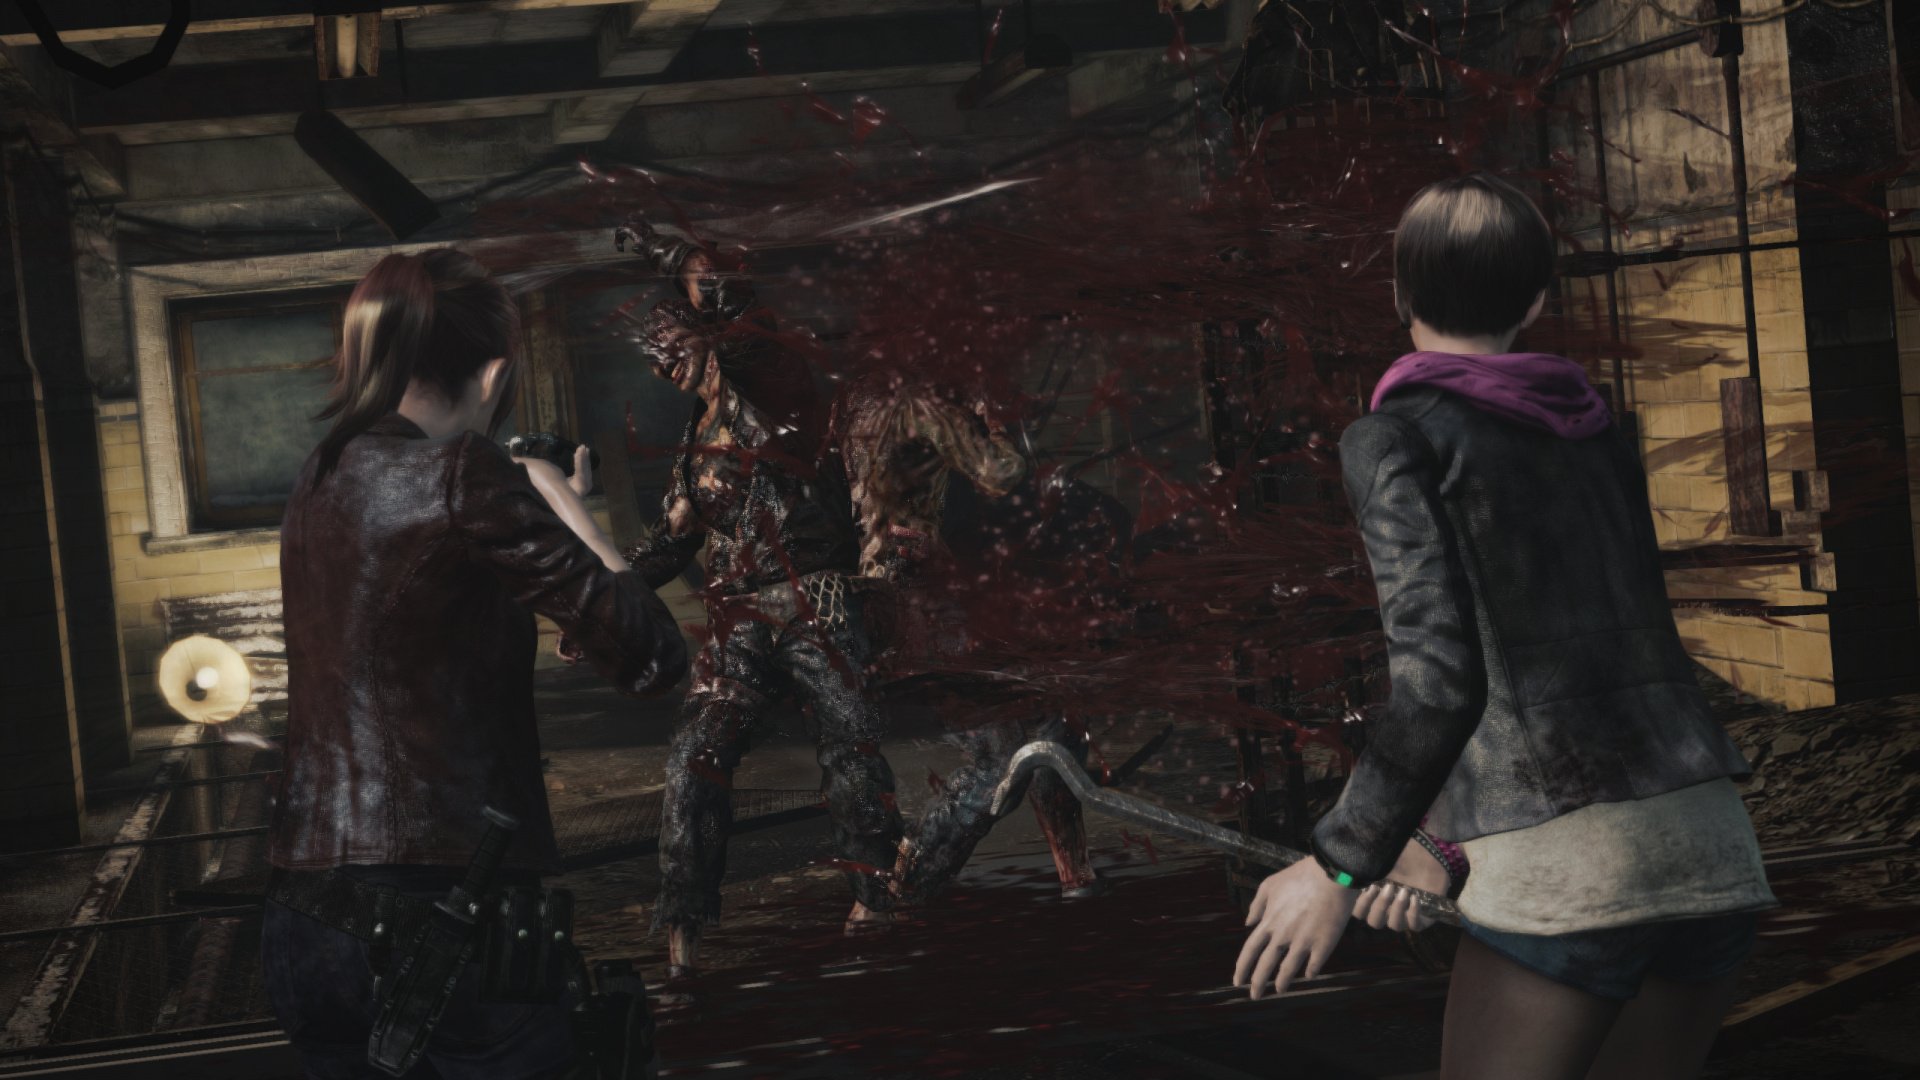 Resident Evil Revelations 2 - Episode 1: Penal Colony Review